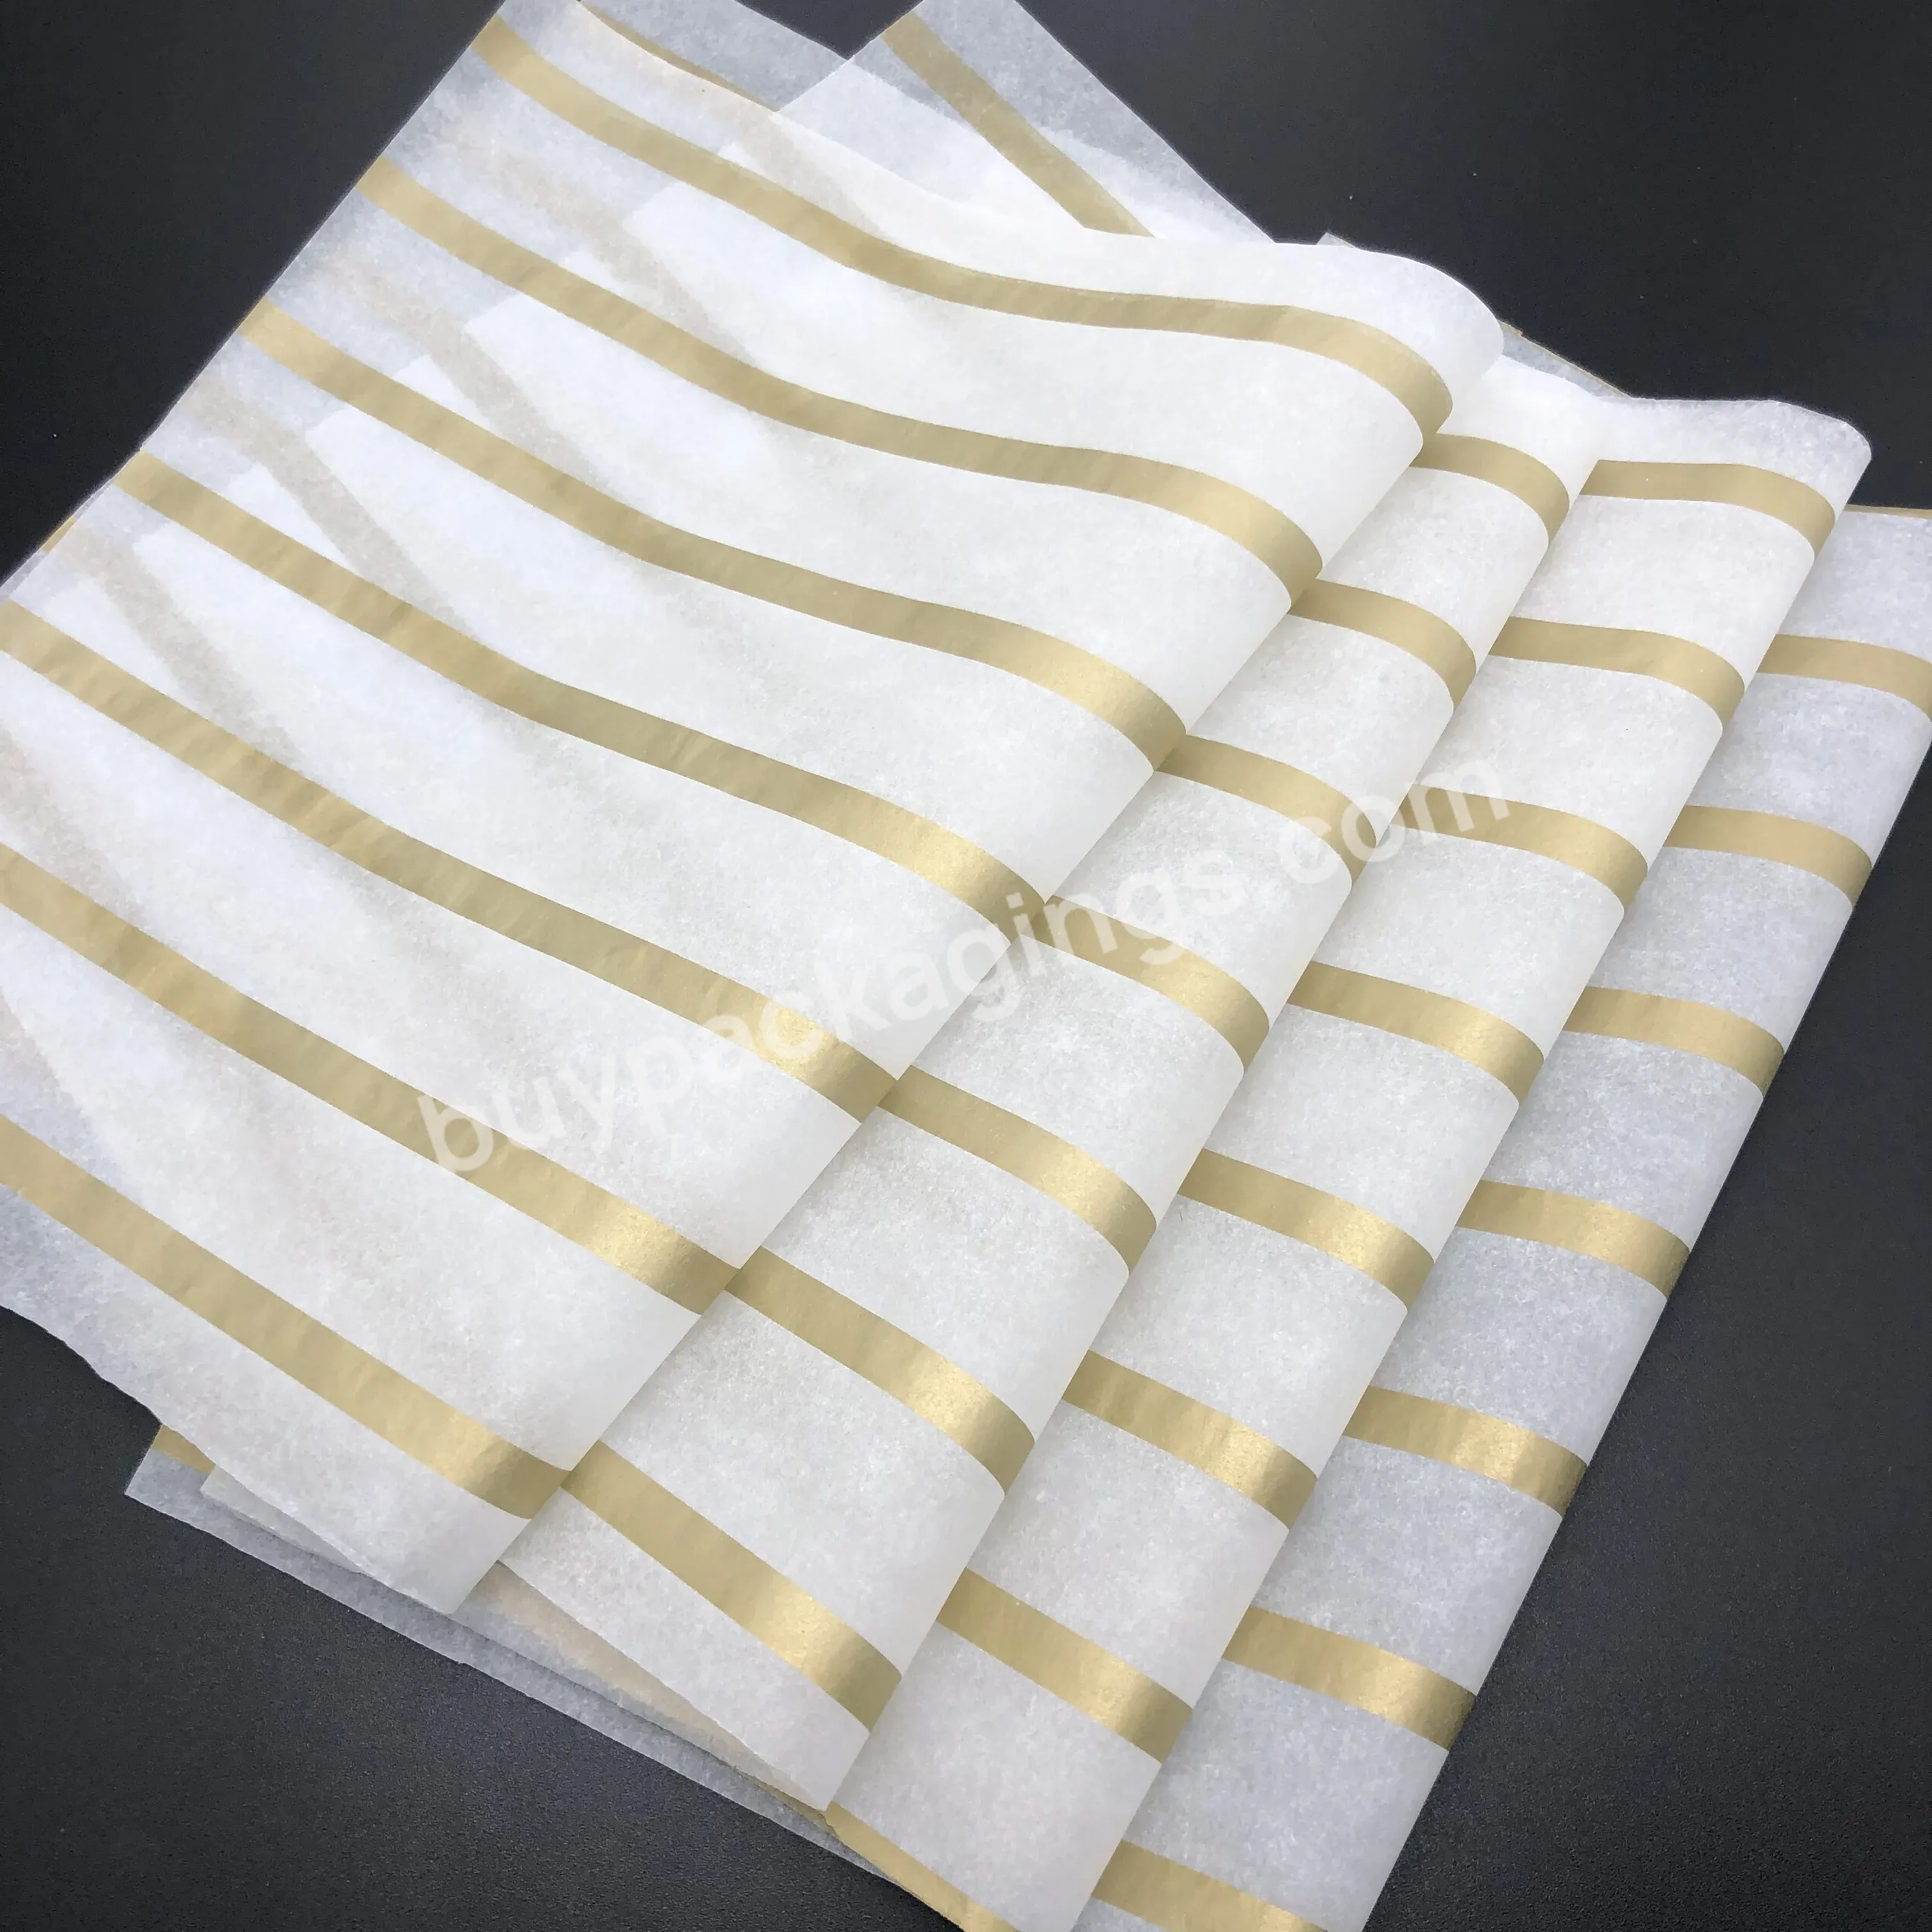 17g Stock White Wrapping Tissue Paper With Gold Line Logo In 53*76cm - Buy White Wrapping Tissue Paper,Wrapping Tissue Paper,Tissue Paper.